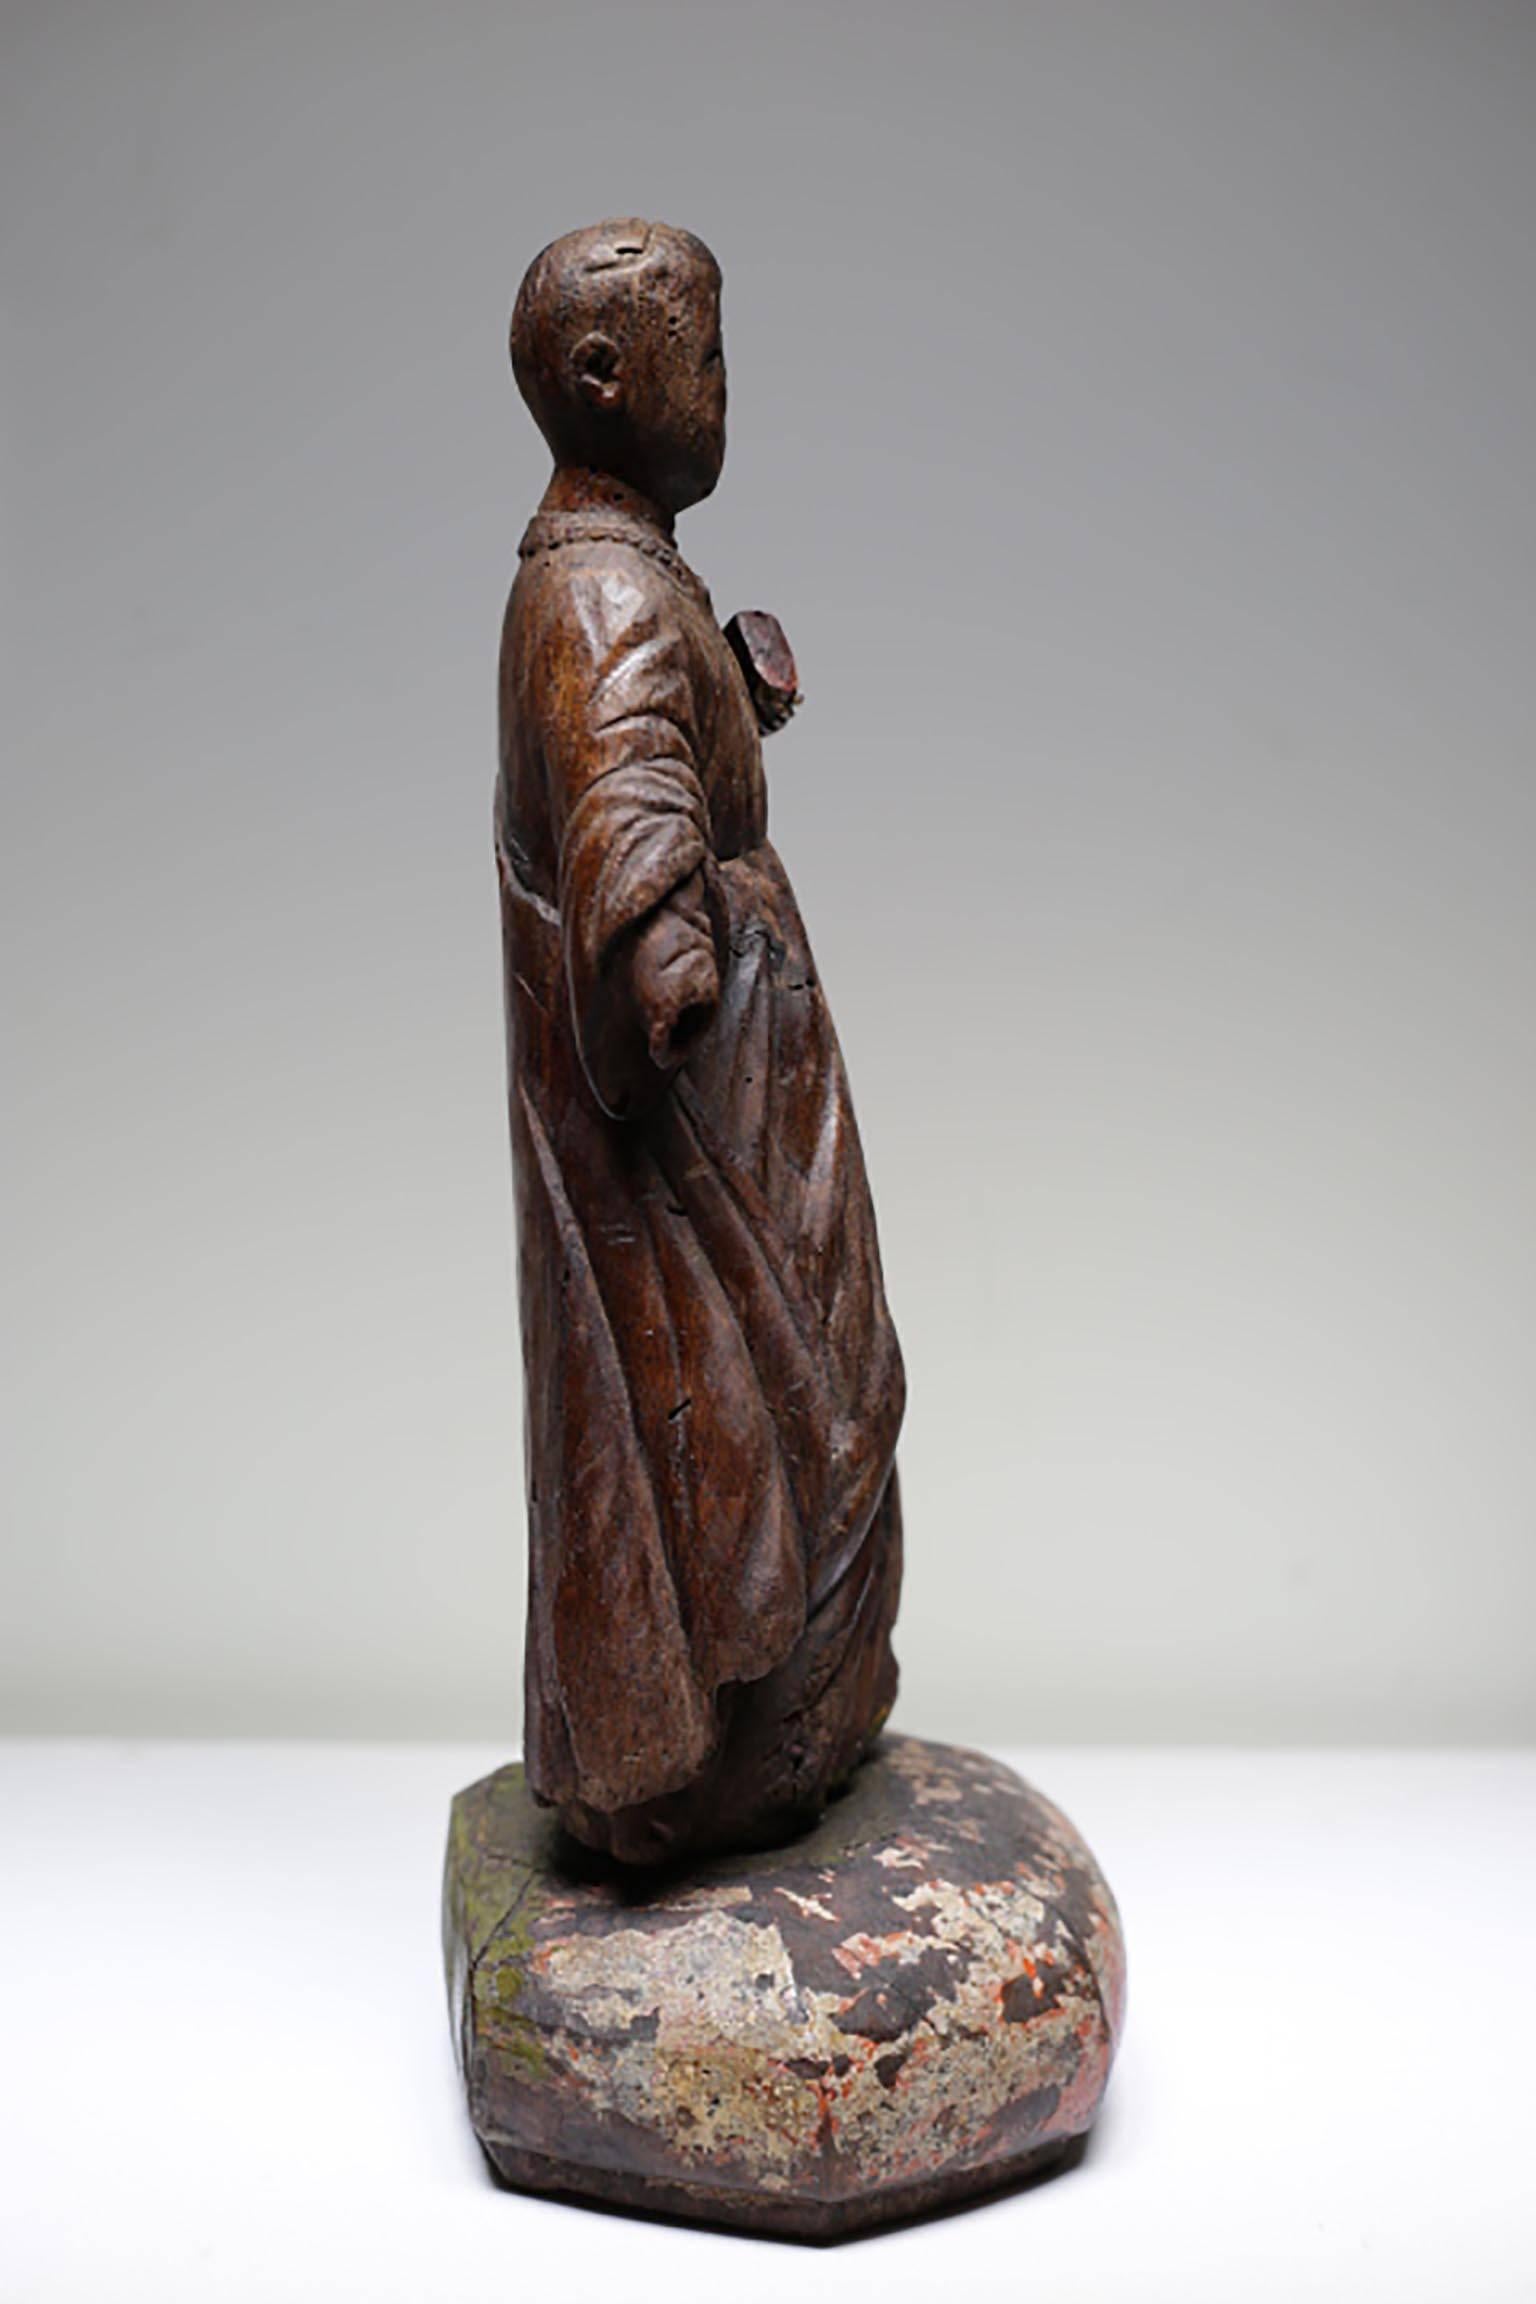 Asian carved wood figure of a Jesuit priest,
possibly Thai or Burmese, 17th-18th century.